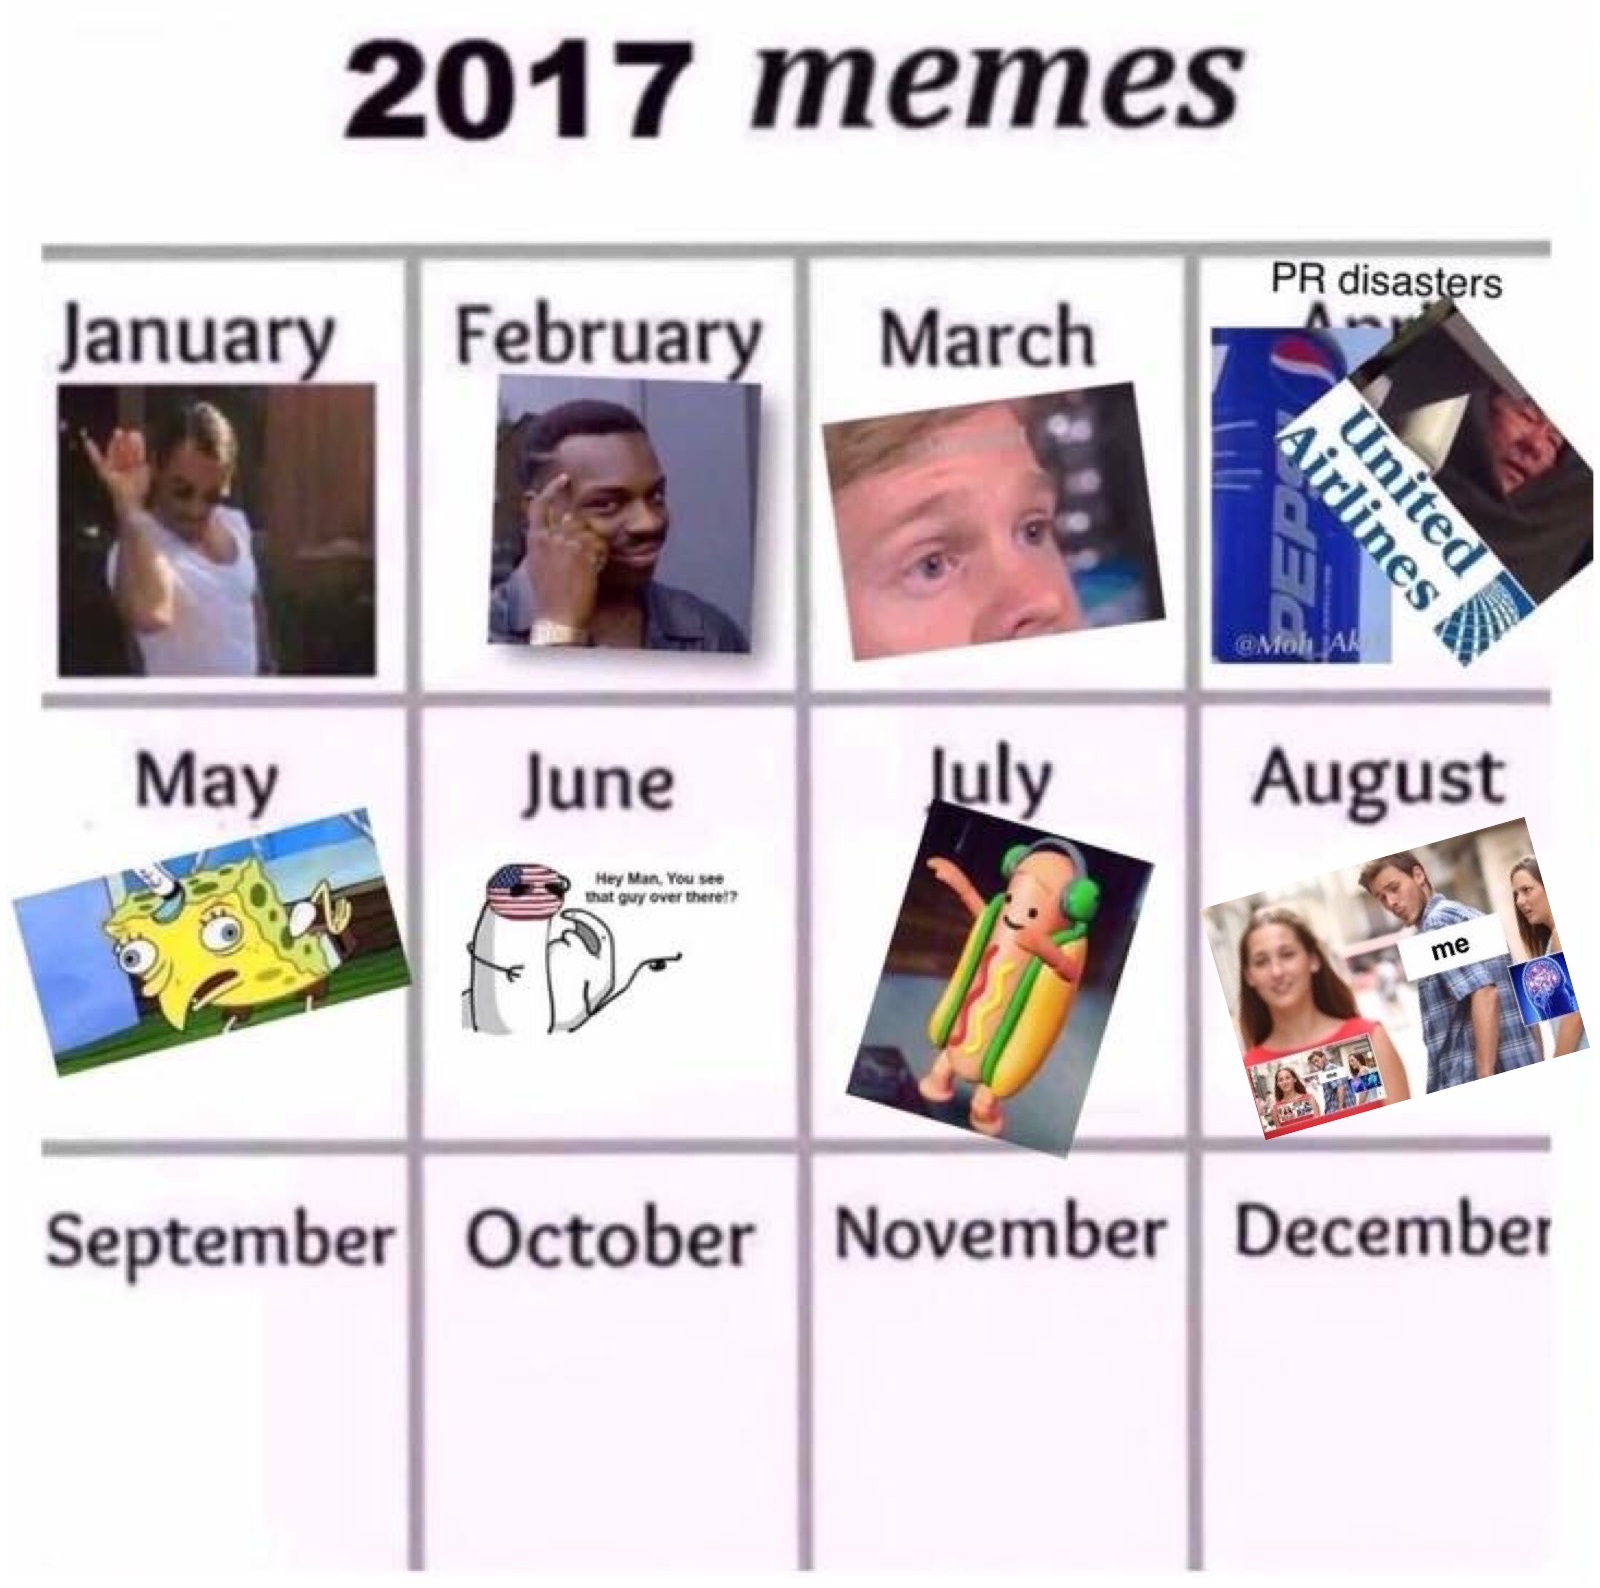 Memes from 2017